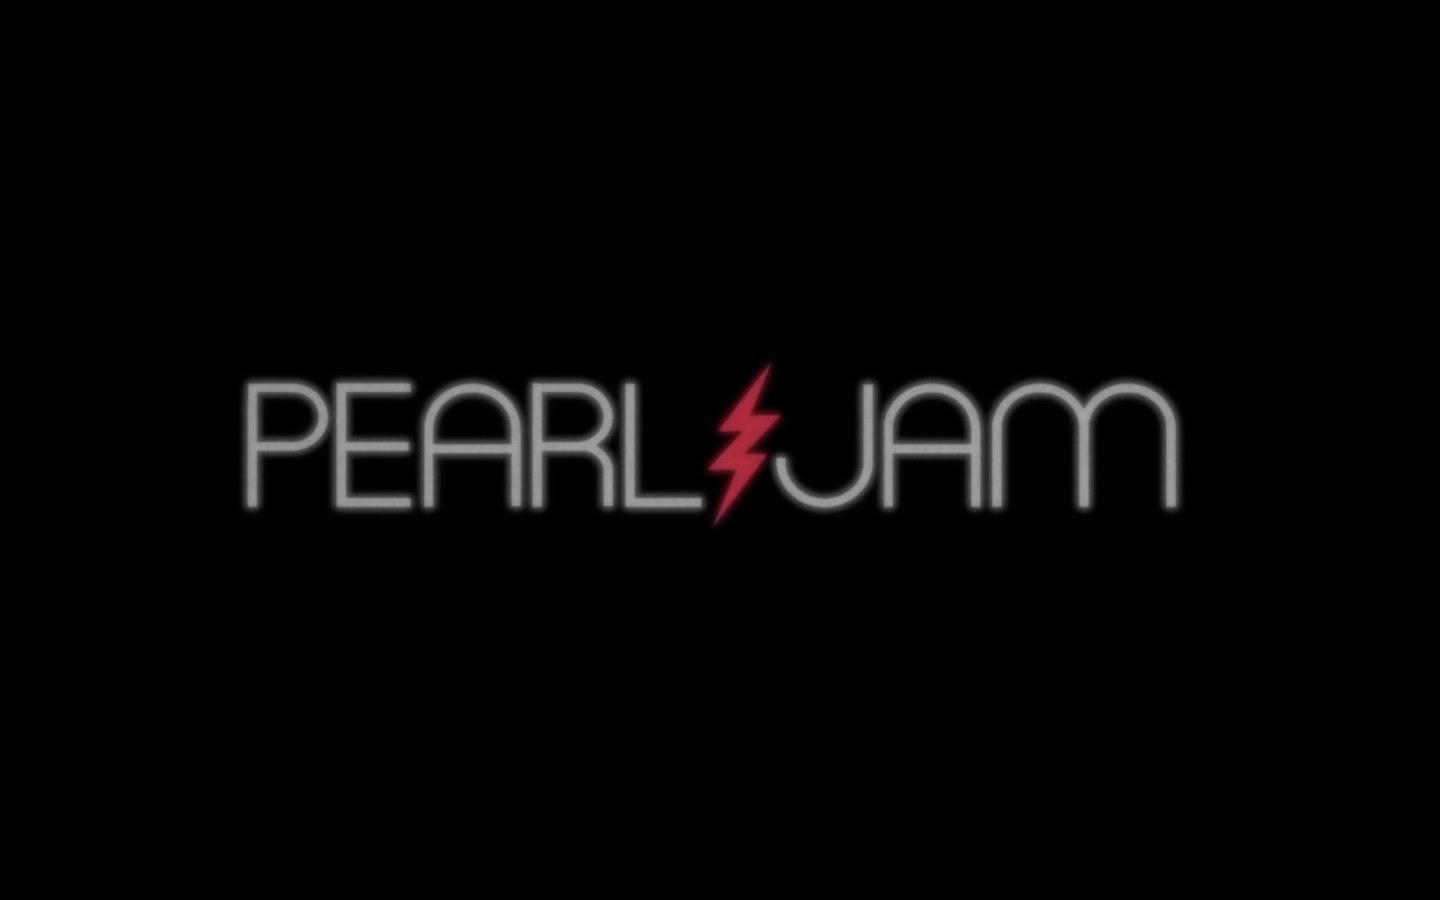 Wele To The Official Pearl Jam Channel